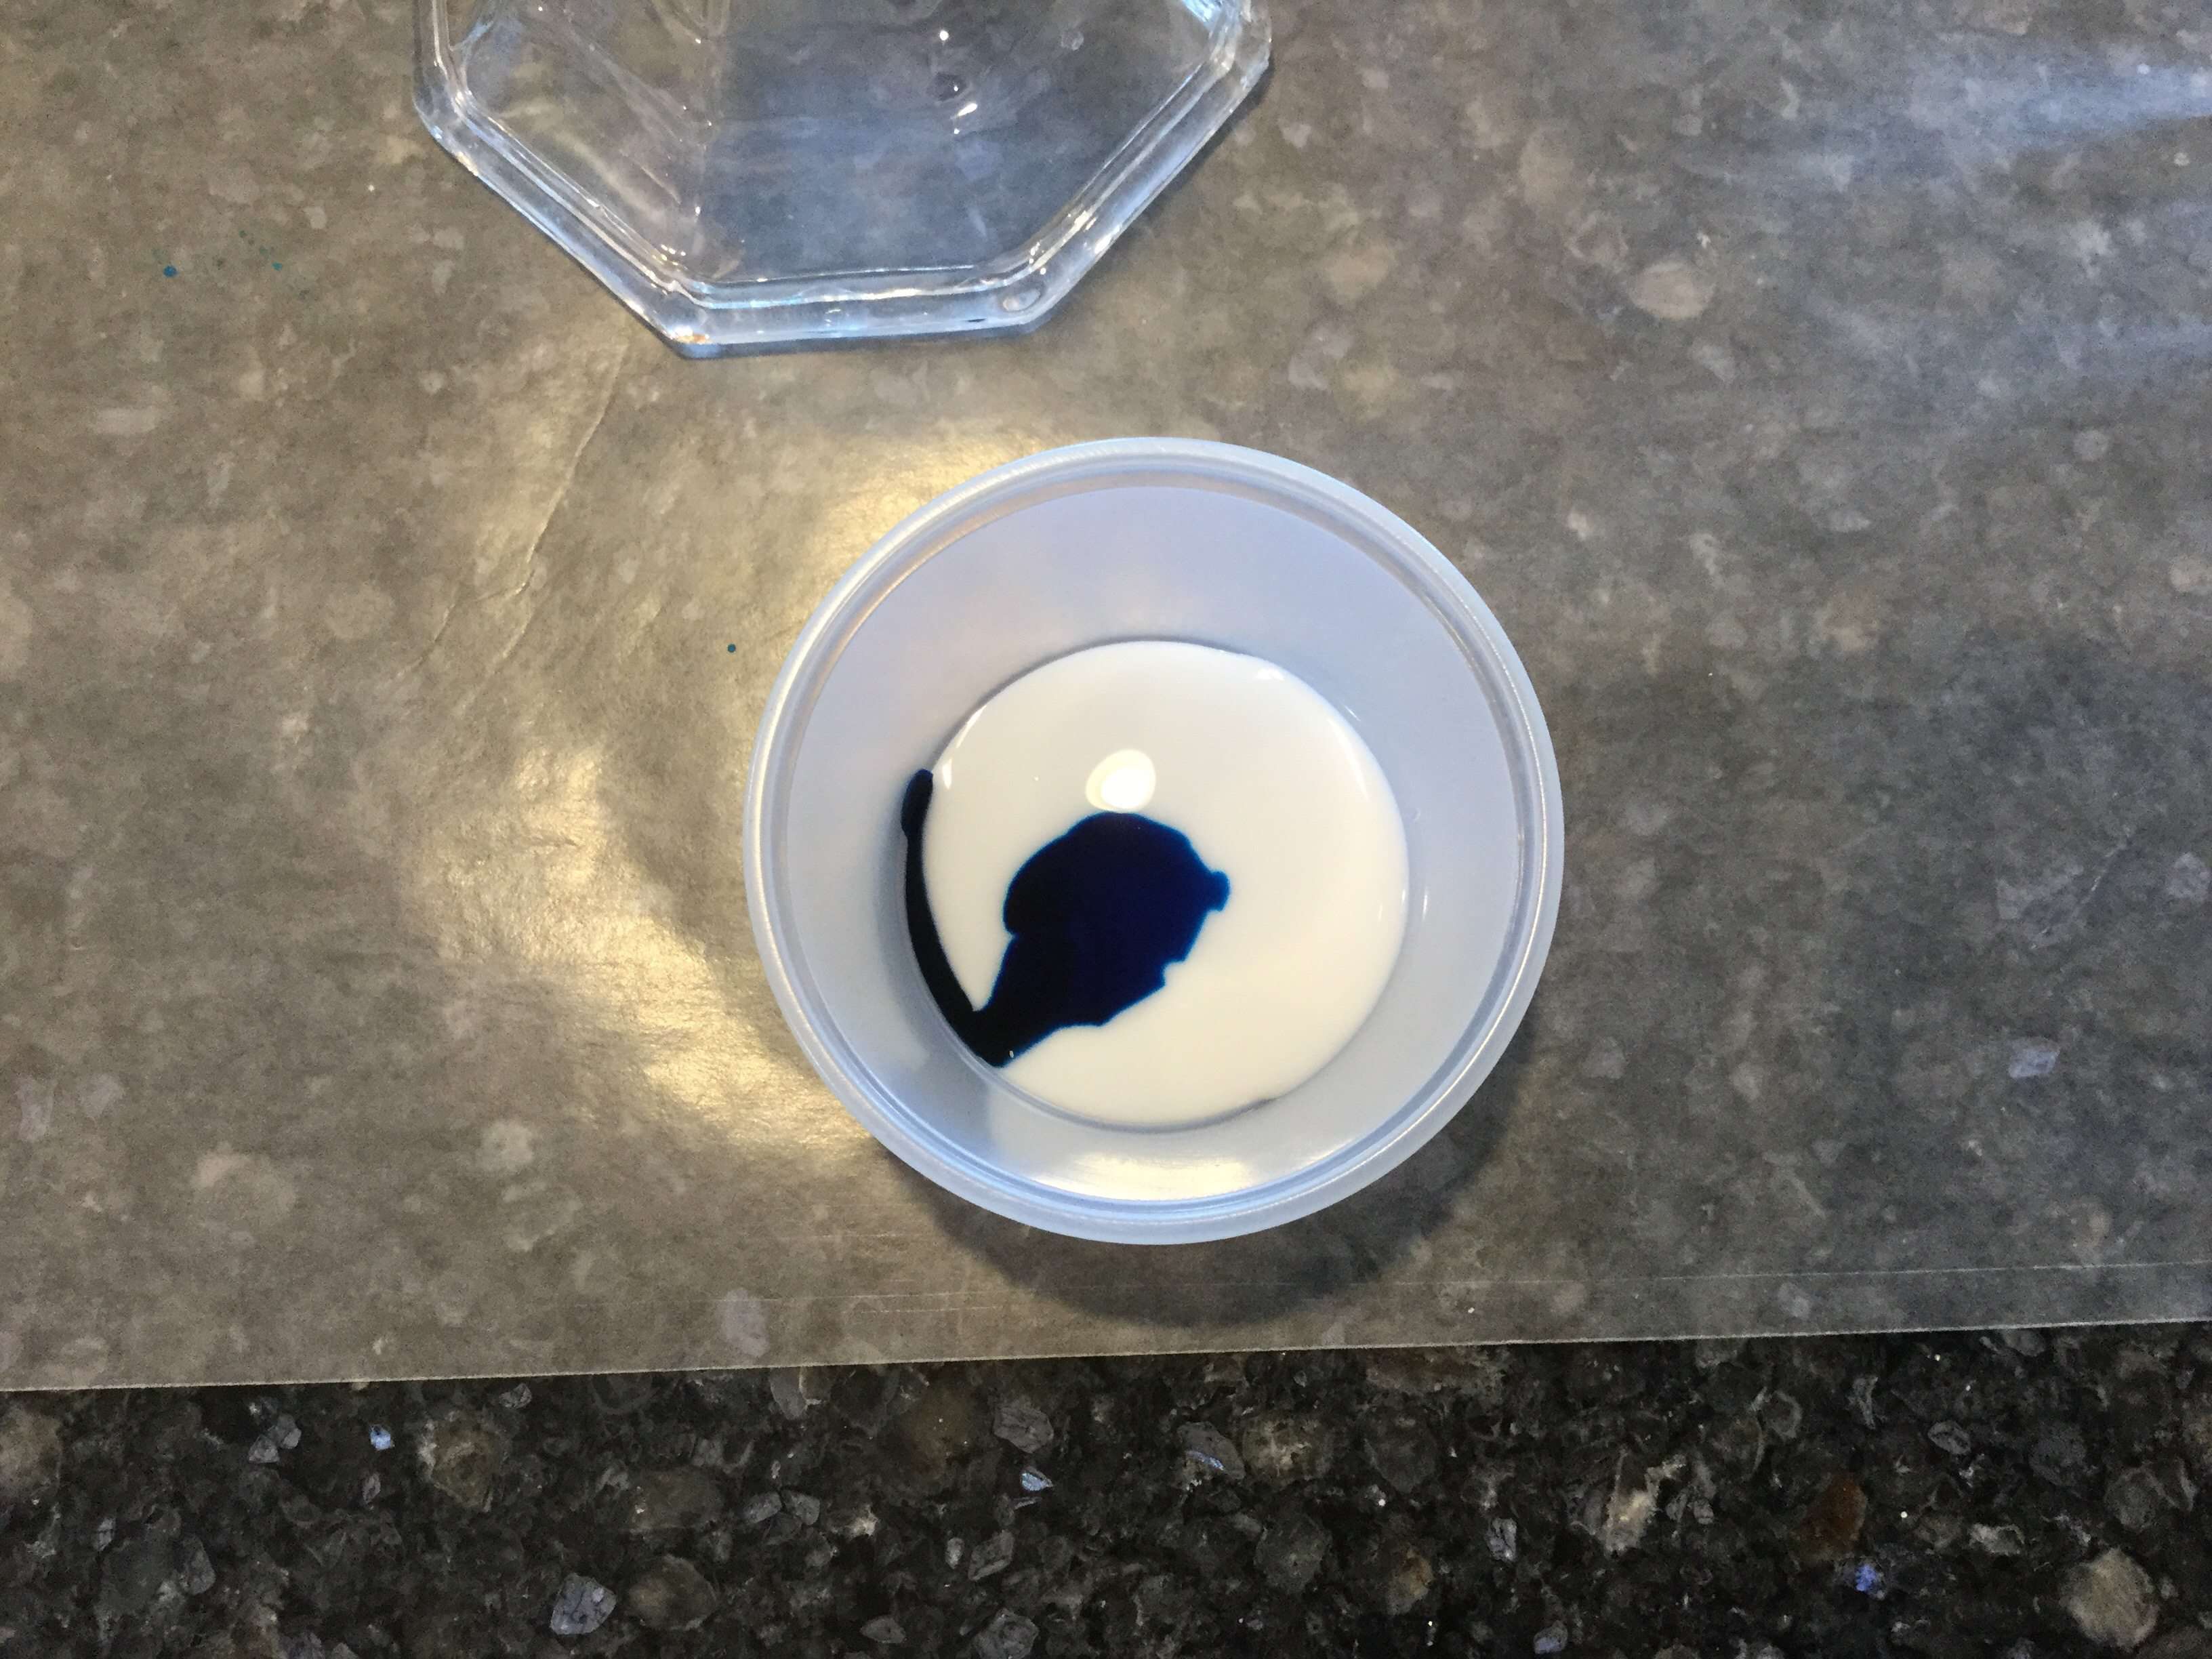 Put your glue in a container and add a few drops of food coloring - you can mix and match to get the color you like. A little goes a long way. For this project I only needed about 2 tablespoons of glue and 3-4 drops of food color.